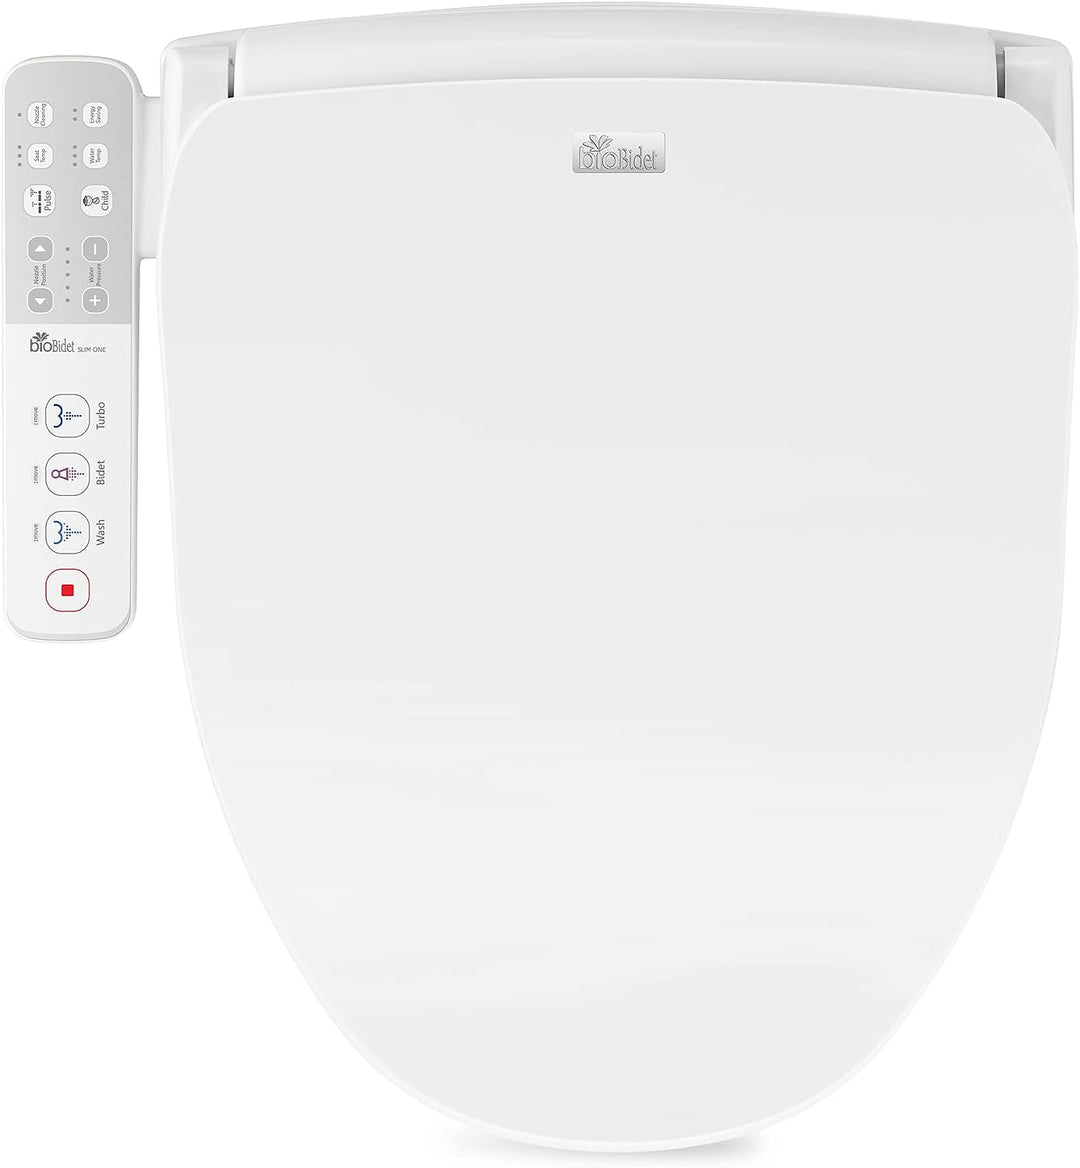 Bio Bidet Slim One Smart Seat for Elongated Toilet with Stainless Steel Self-Cleaning Nozzle, Nightlight, Turbo Wash, Oscillating & Fusion Warm Water Technology, White